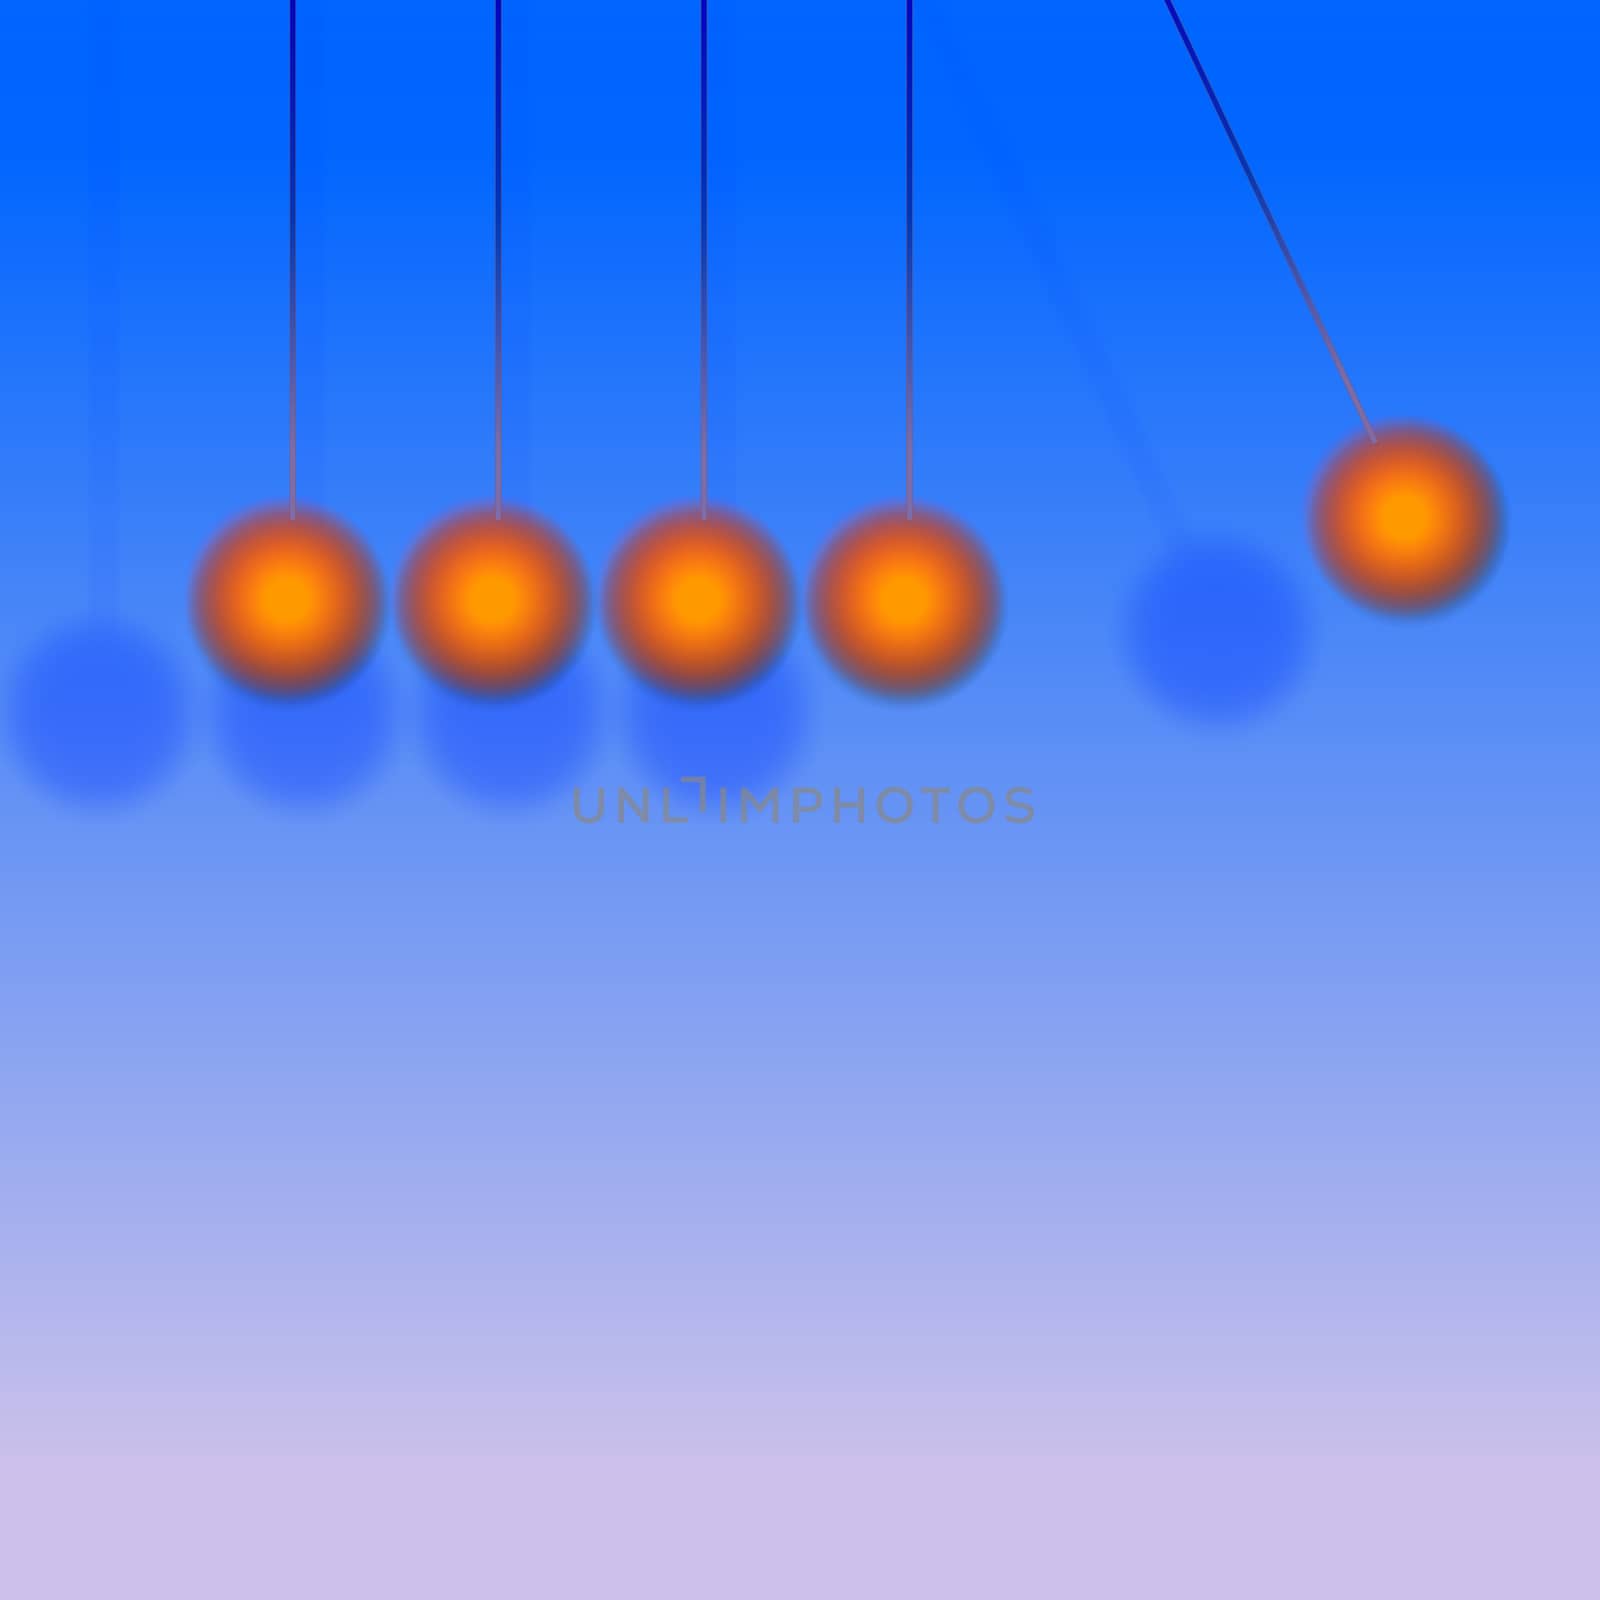 hanging 5 red baubles against a blue background digital graphics